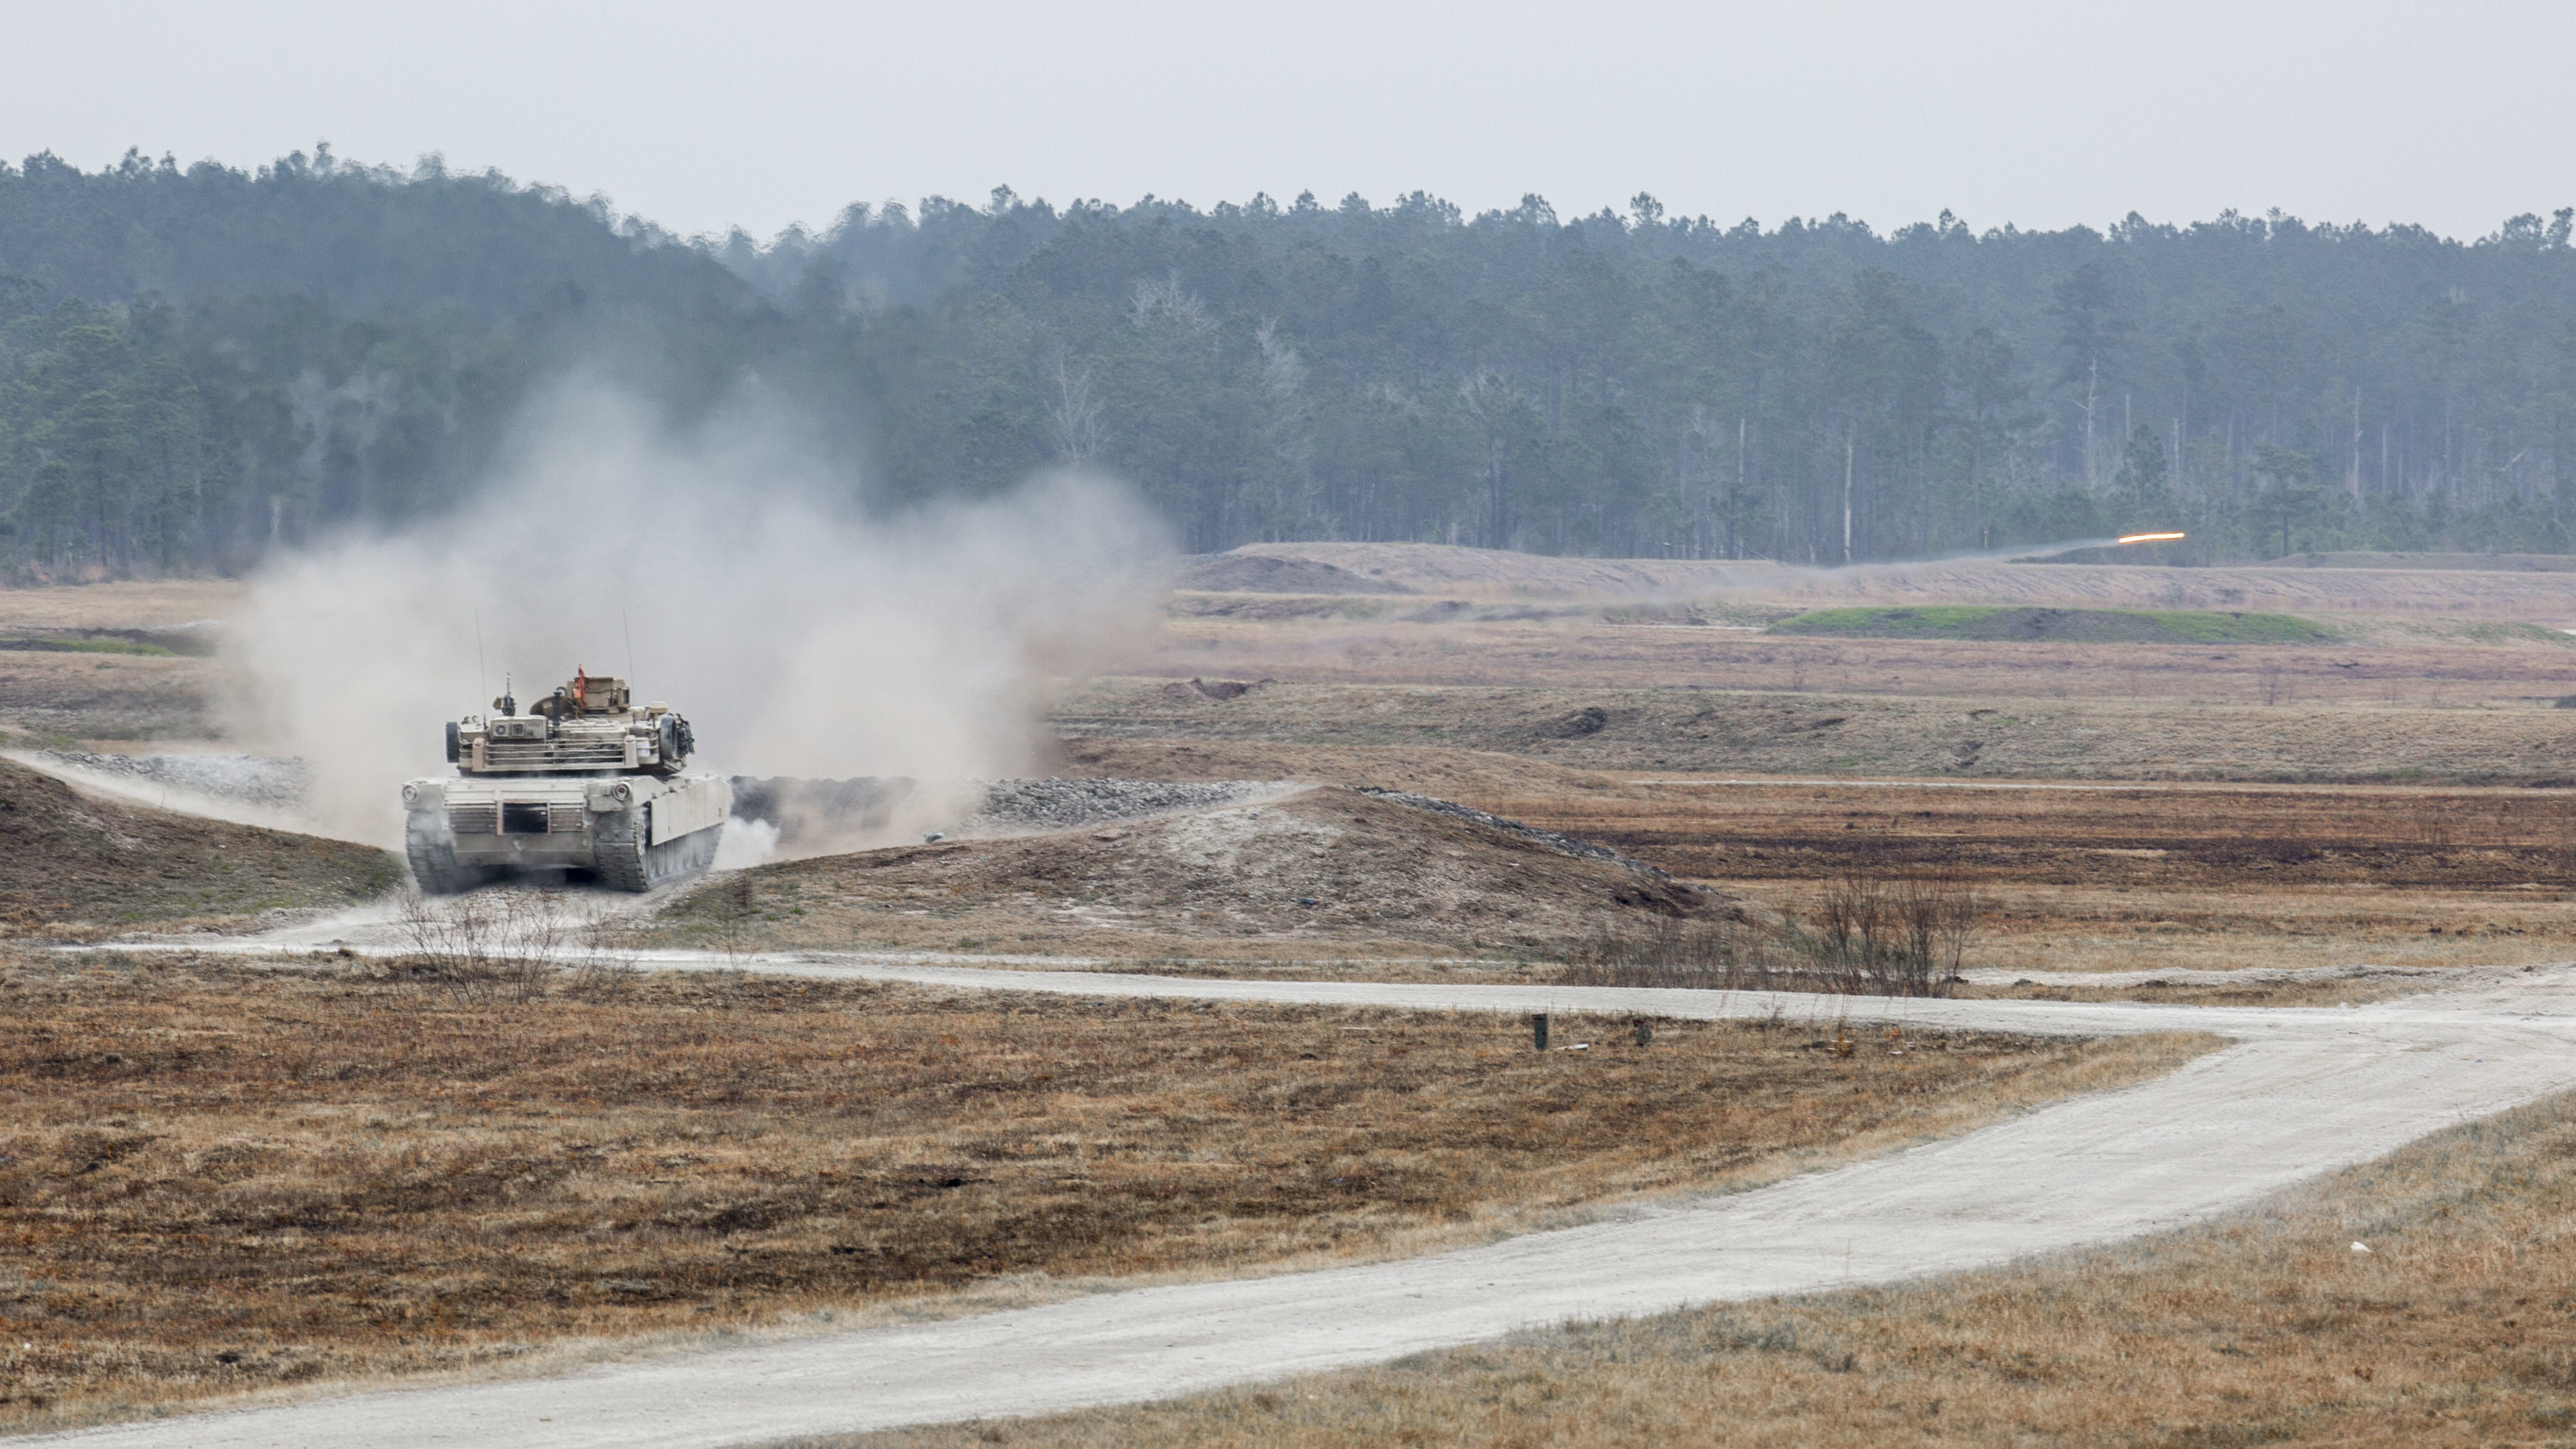 U.S. Marines with Company B, 2nd Tank Battalion, fire a 120mm smoothbore main gun from an M1A1 Abrams Main Battle Tank during a live-fire exercise at Range SR-10, Camp Lejeune, N.C., Jan. 28, 2016. 2nd Tank Battalion conducted marksmanship qualifications during a month-long field exercise. (U.S. Marine Corps photo by Sgt. Christopher Q. Stone, MCIEAST Combat Camera/Released)